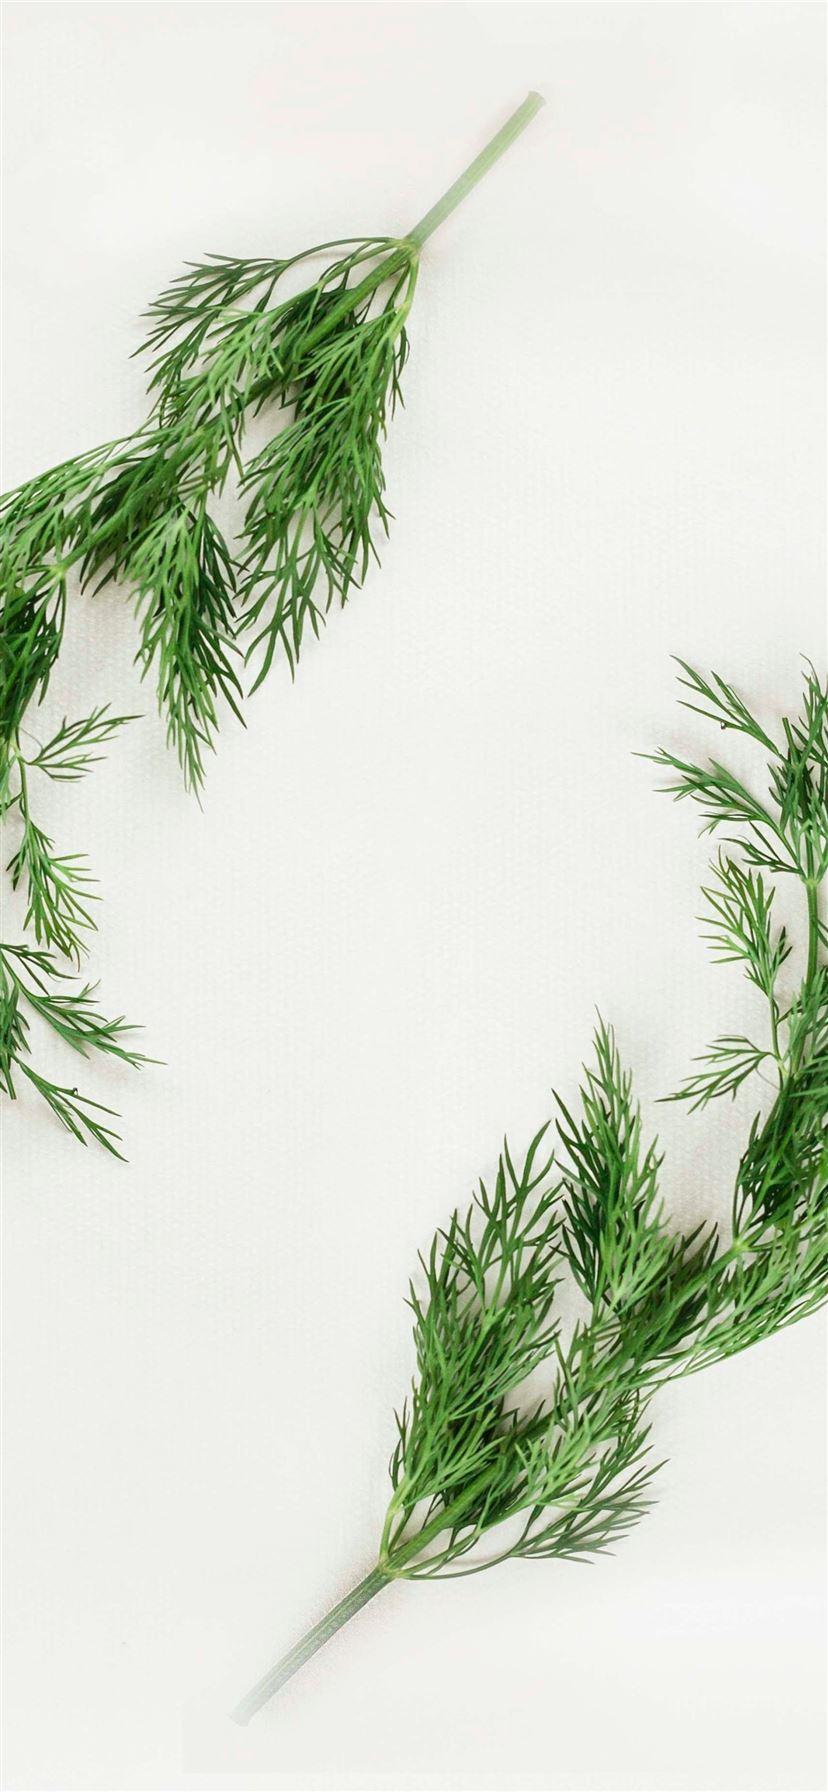 green leafed plants on white background iPhone 11 wallpaper 